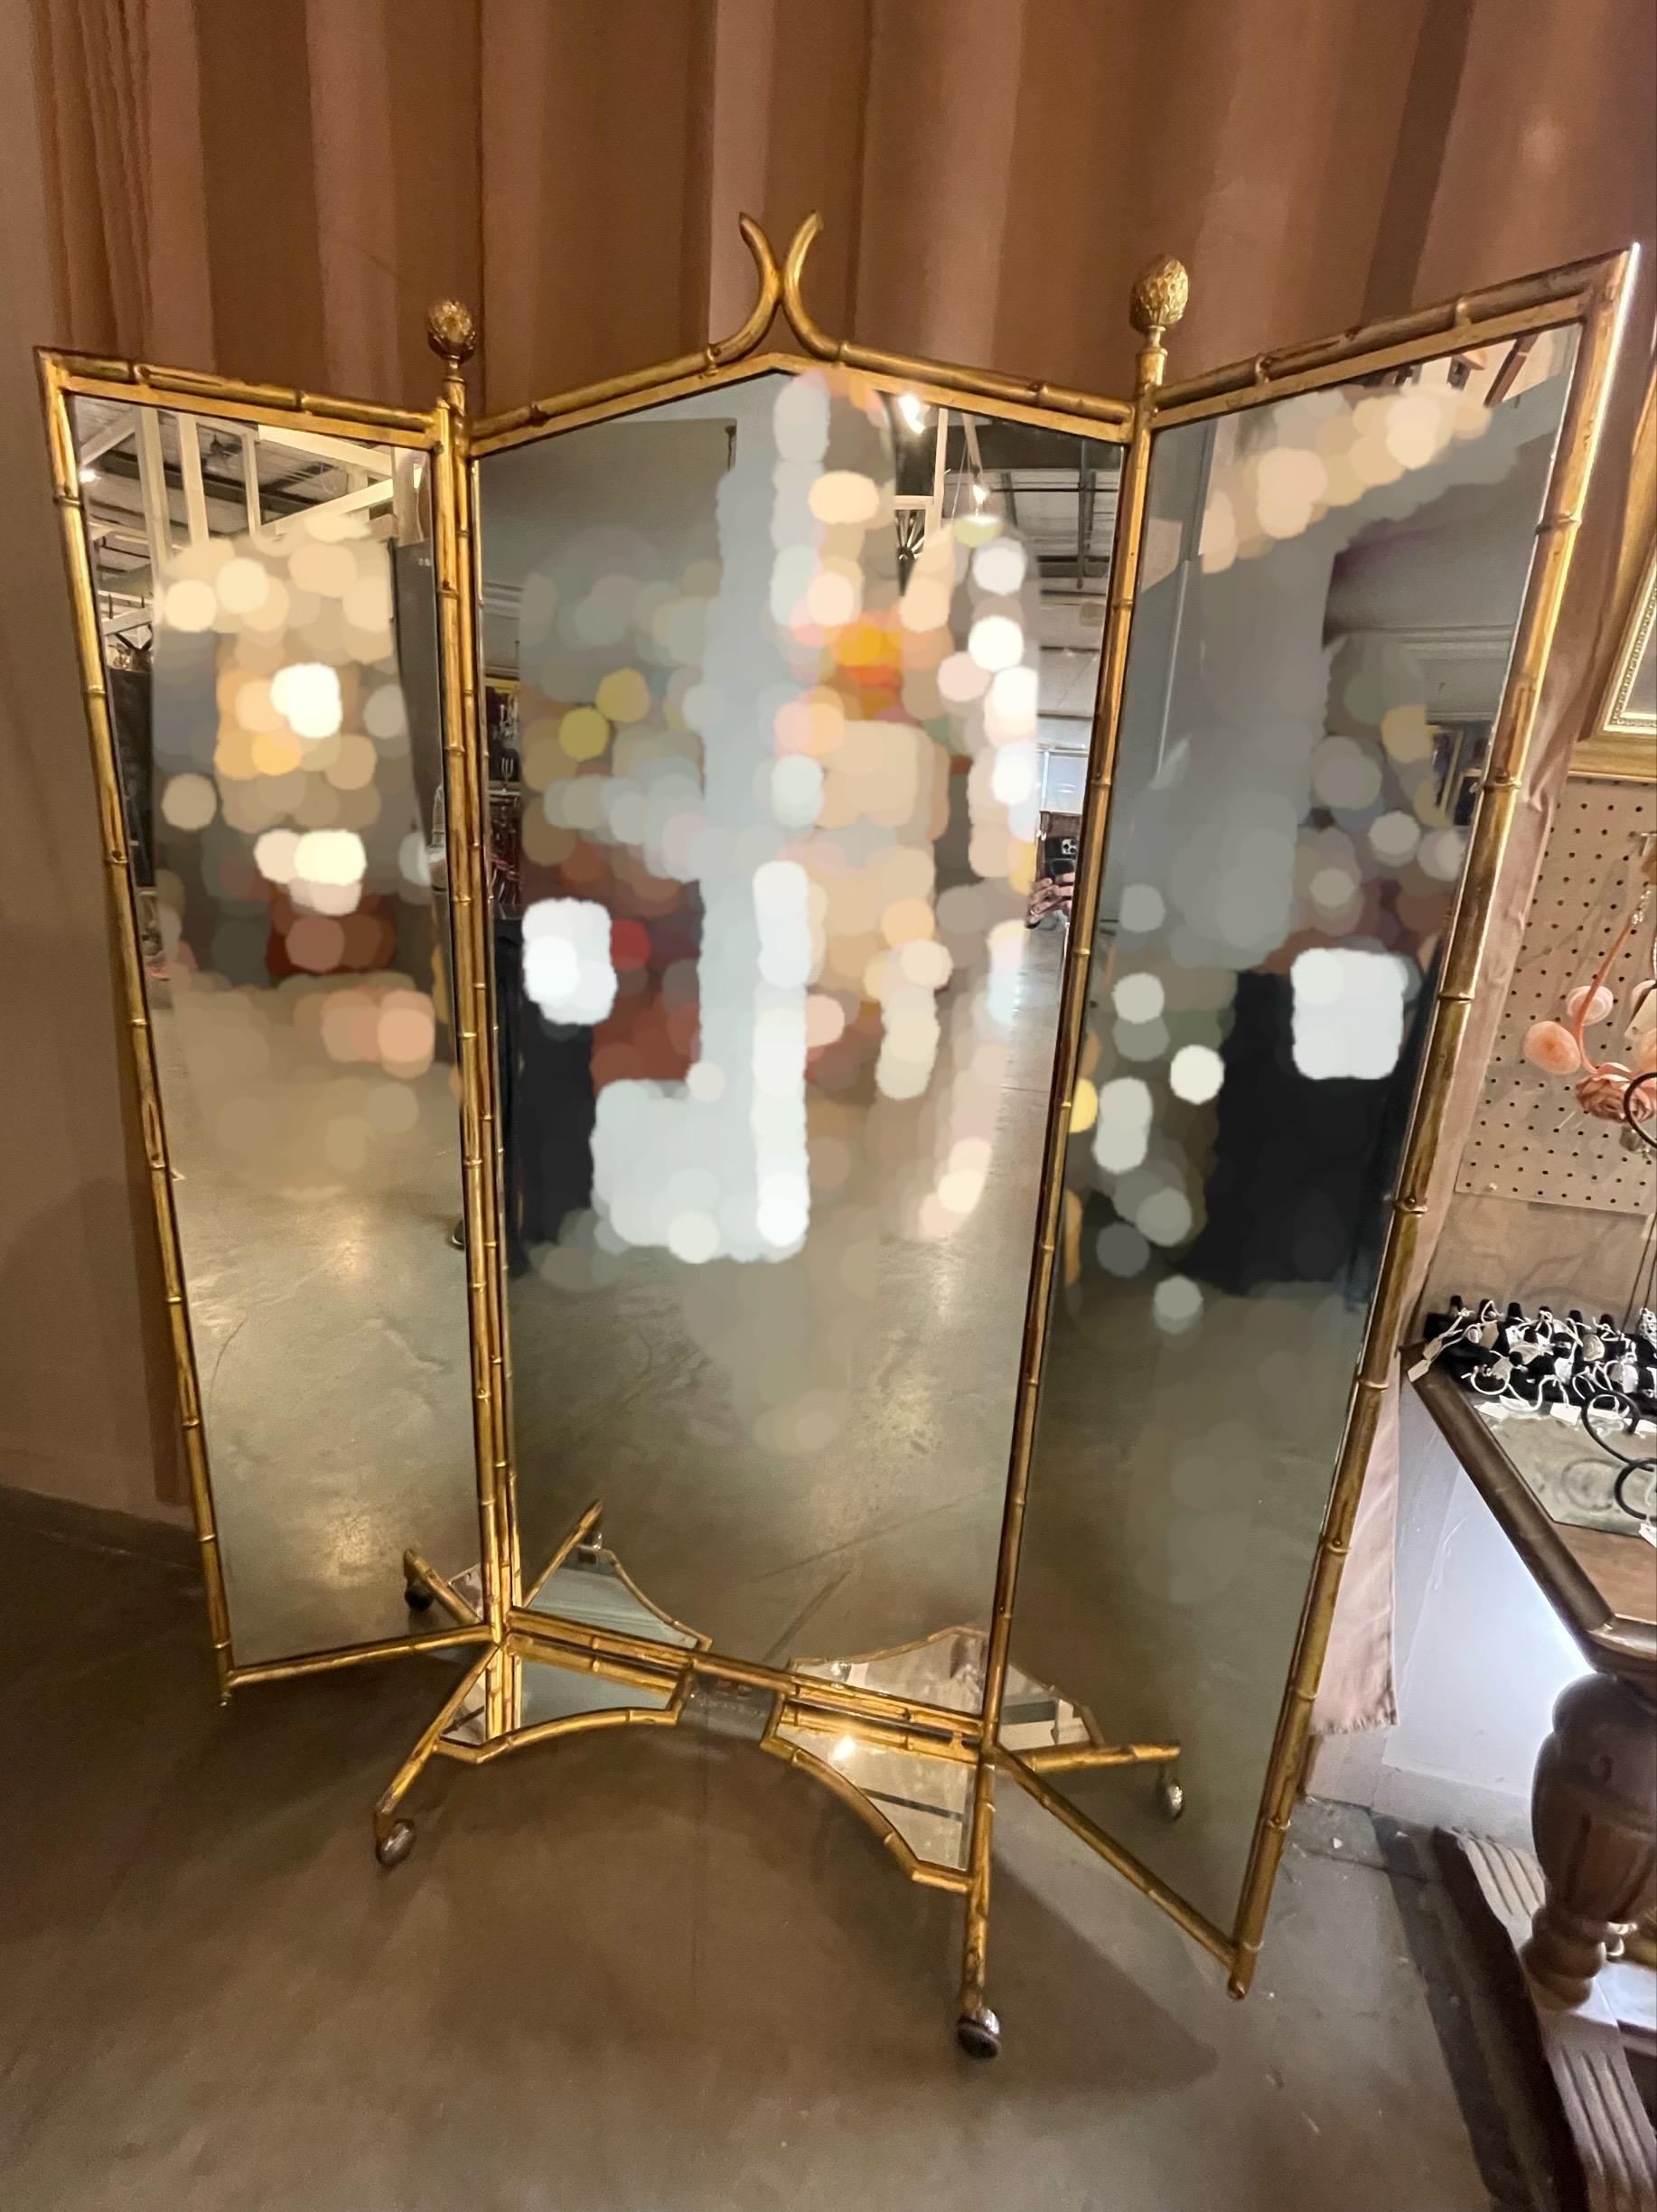 French Victorian faux bamboo gold three-way (triptych) cheval mirror.

Brass tryptych dressing mirror from the renowned company of Miroir Brot of Paris. The solid brass framed mirrors, bear the Brot label. The three mirrors are housed in painted